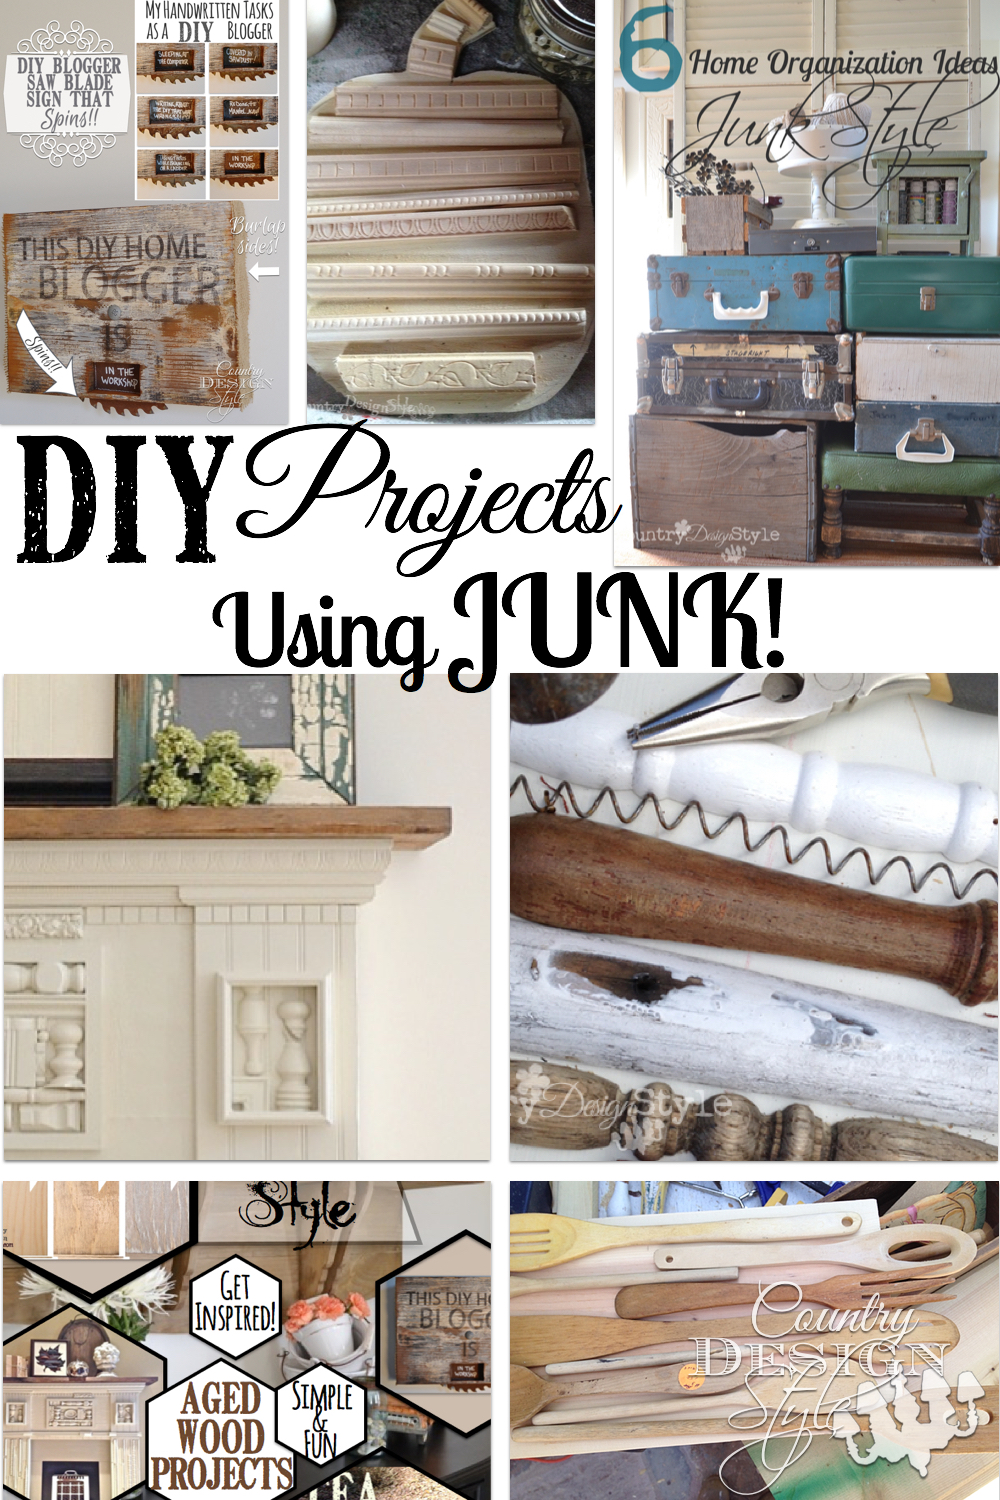 DIY junk projects!  A whole collection of junk projects.  Organize with junk, build with junk, decorate with junk.  Country Design Style